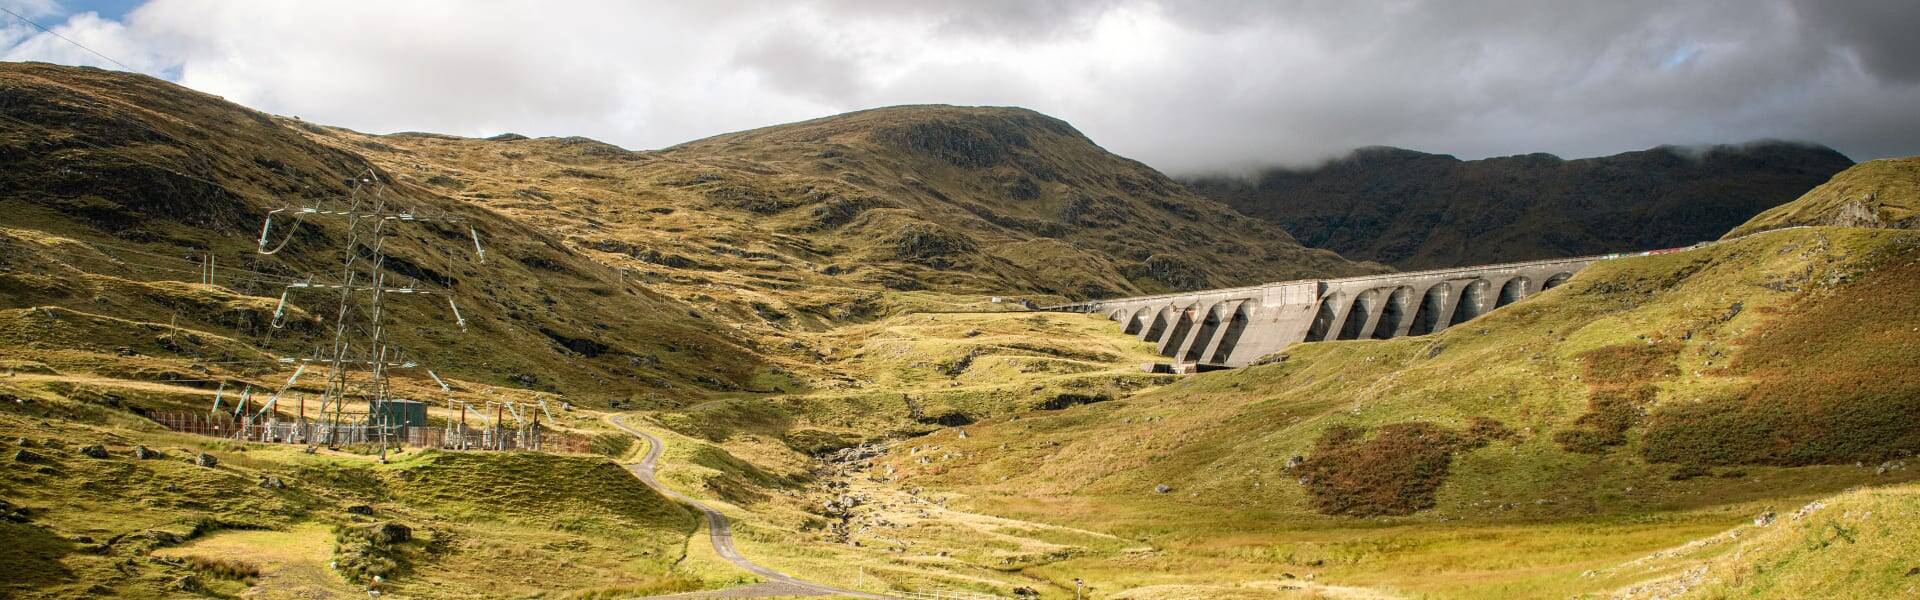 Drax looks to expand Cruachan pumped hydro storage plant